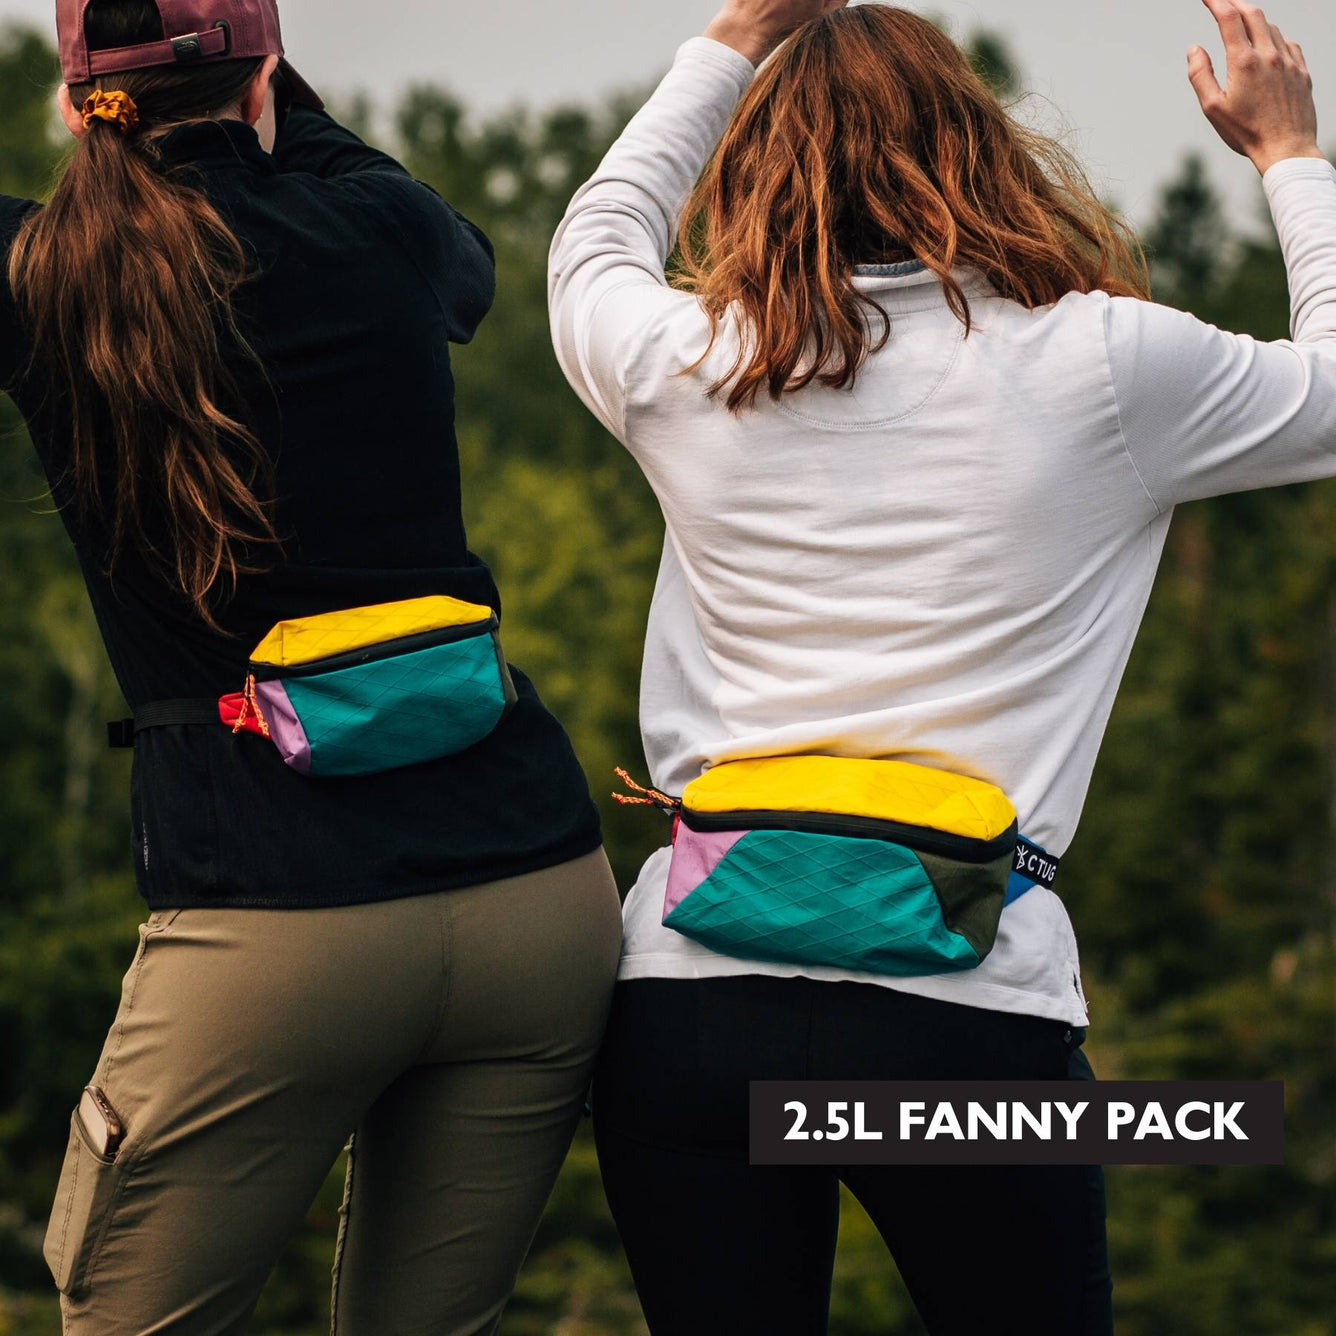 DIY Fanny Pack: How to Make a Fanny Pack